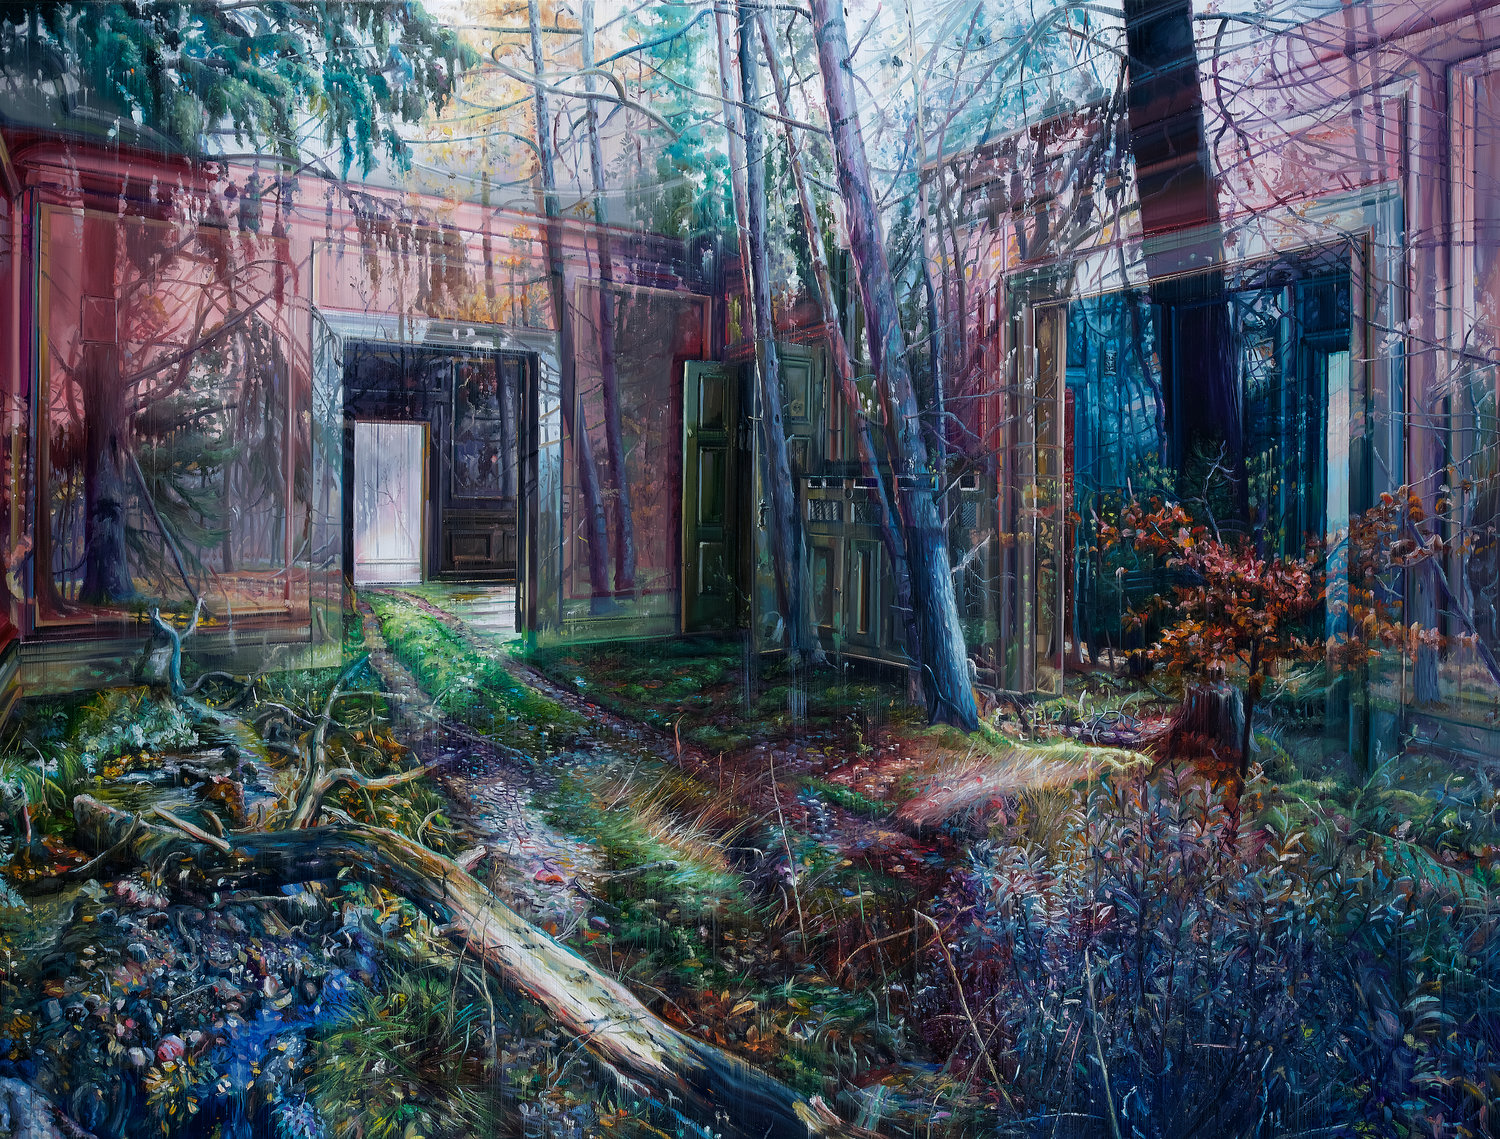 Multi-Layered Oil Paintings by Jacob Brostrup Blur Natural and Built Environments